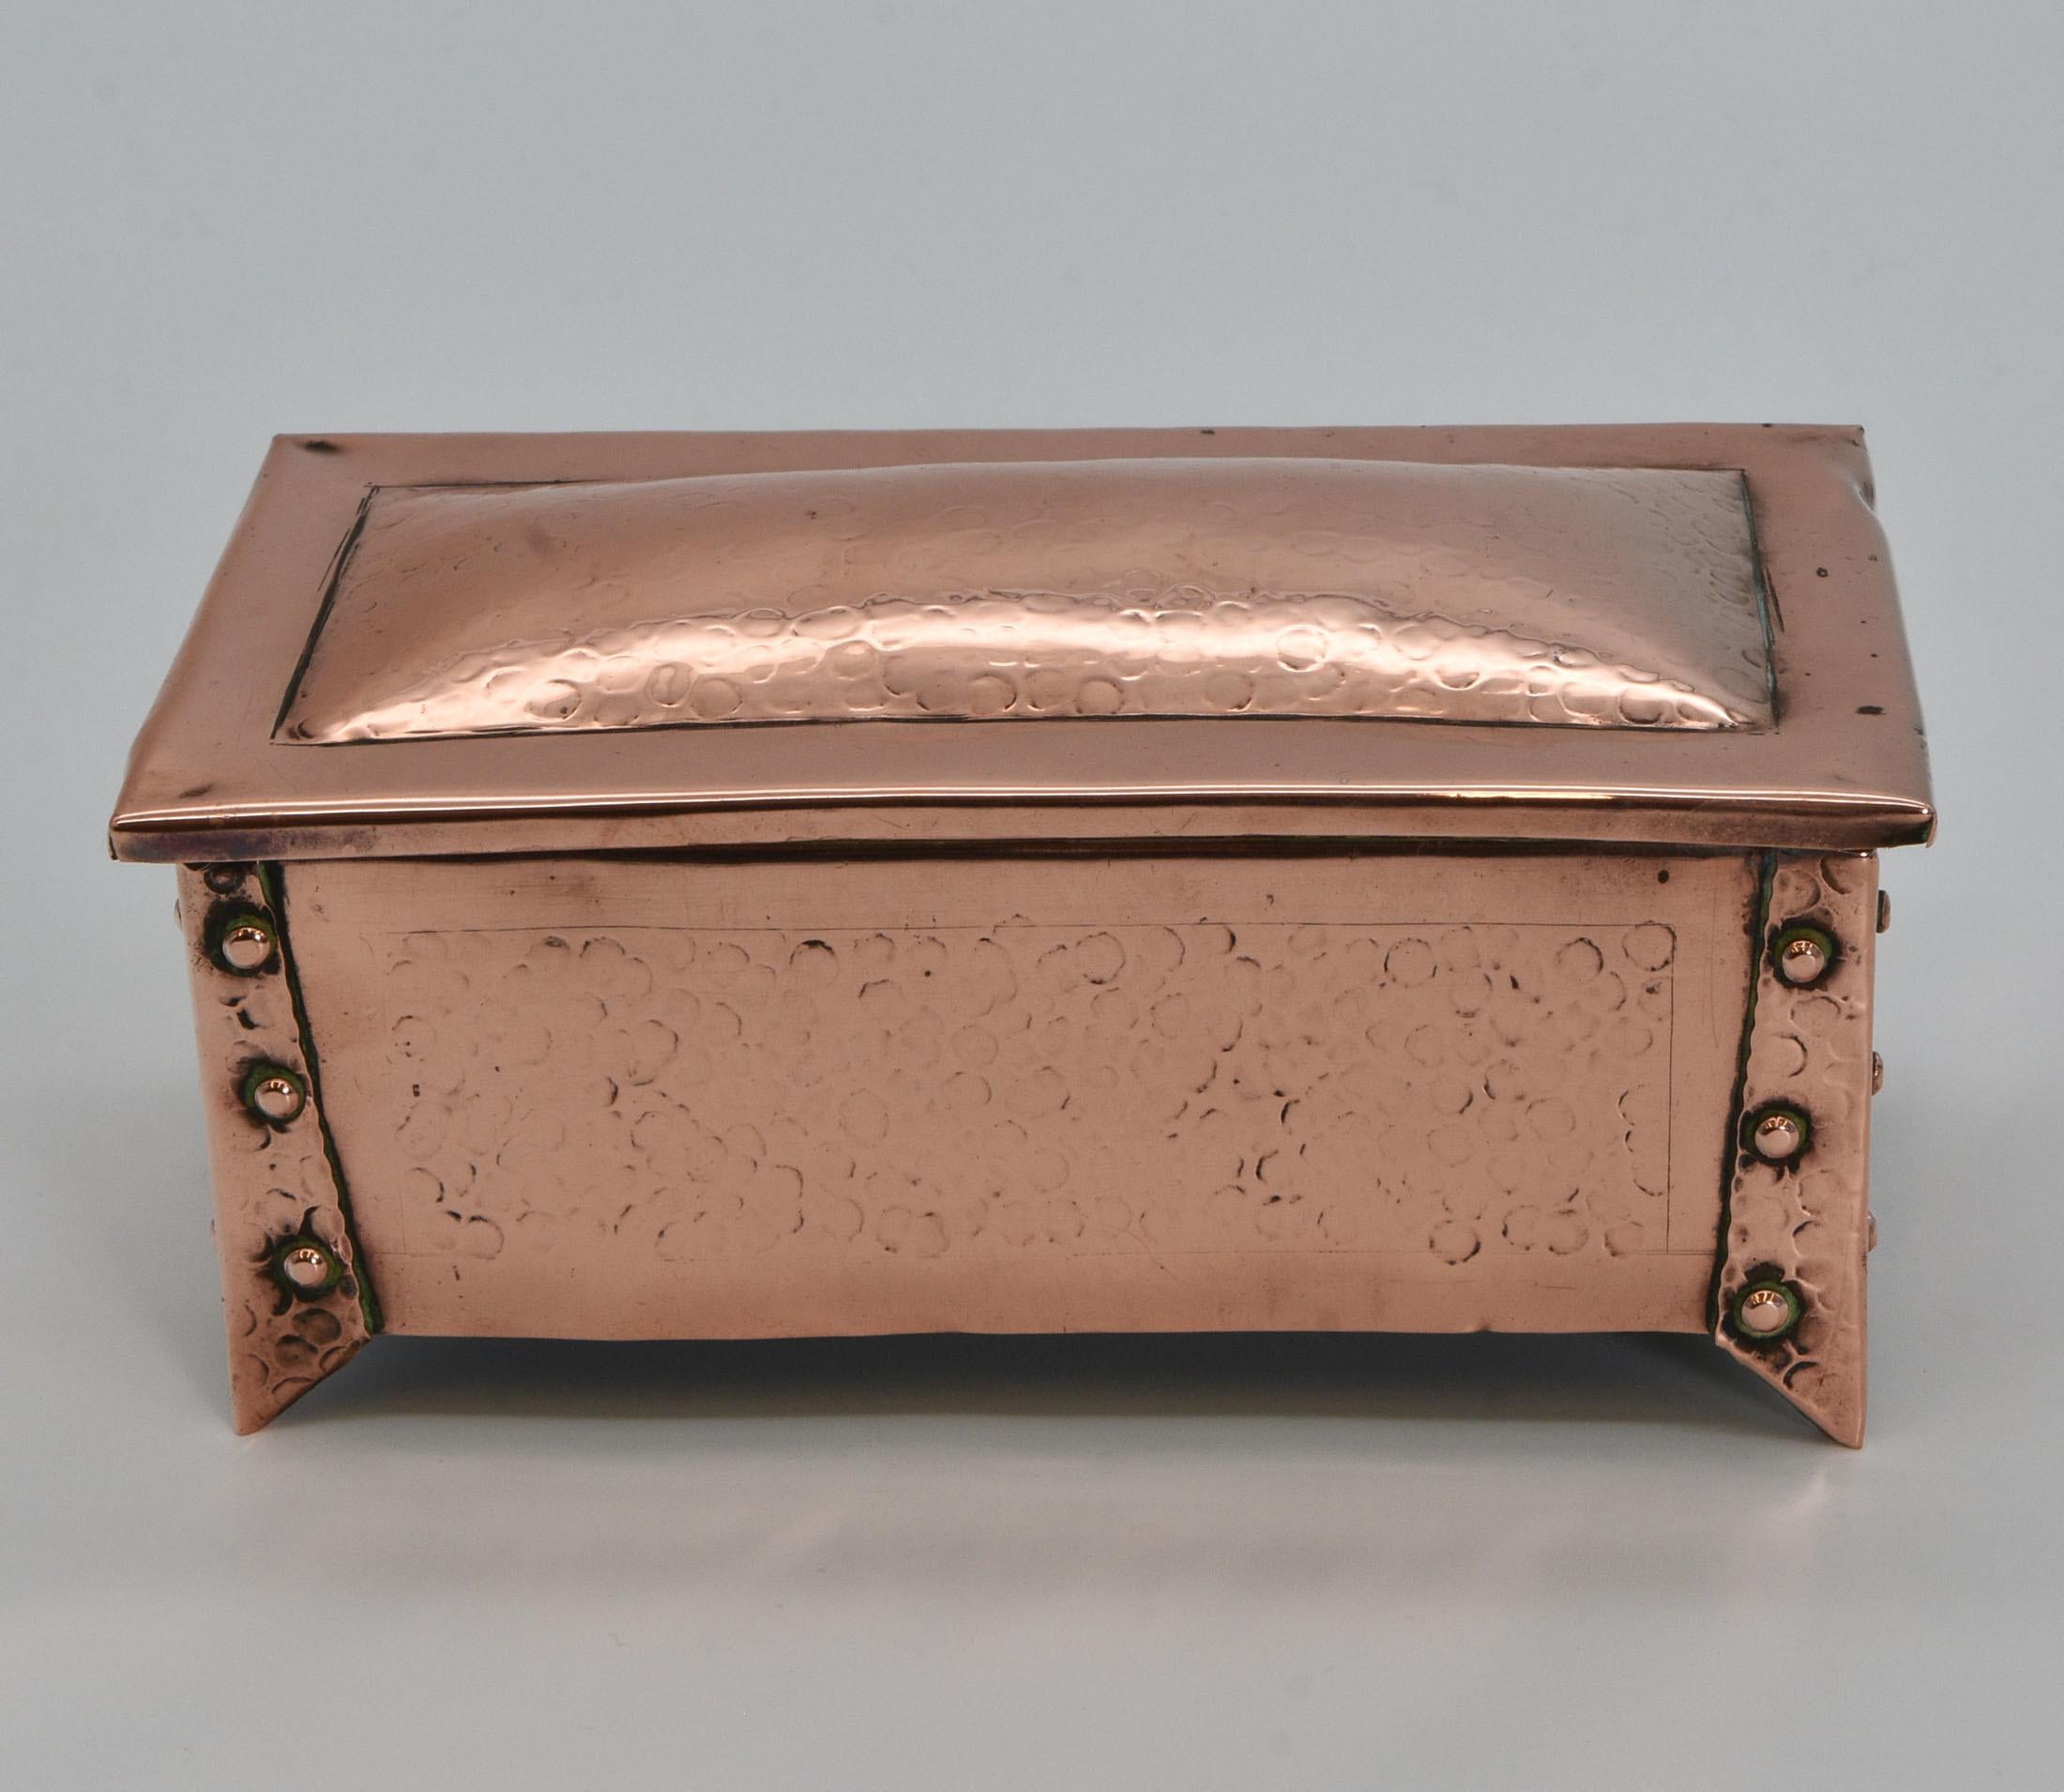 Hand-Crafted Arts & Crafts Small Copper Box, Circa 1900 For Sale